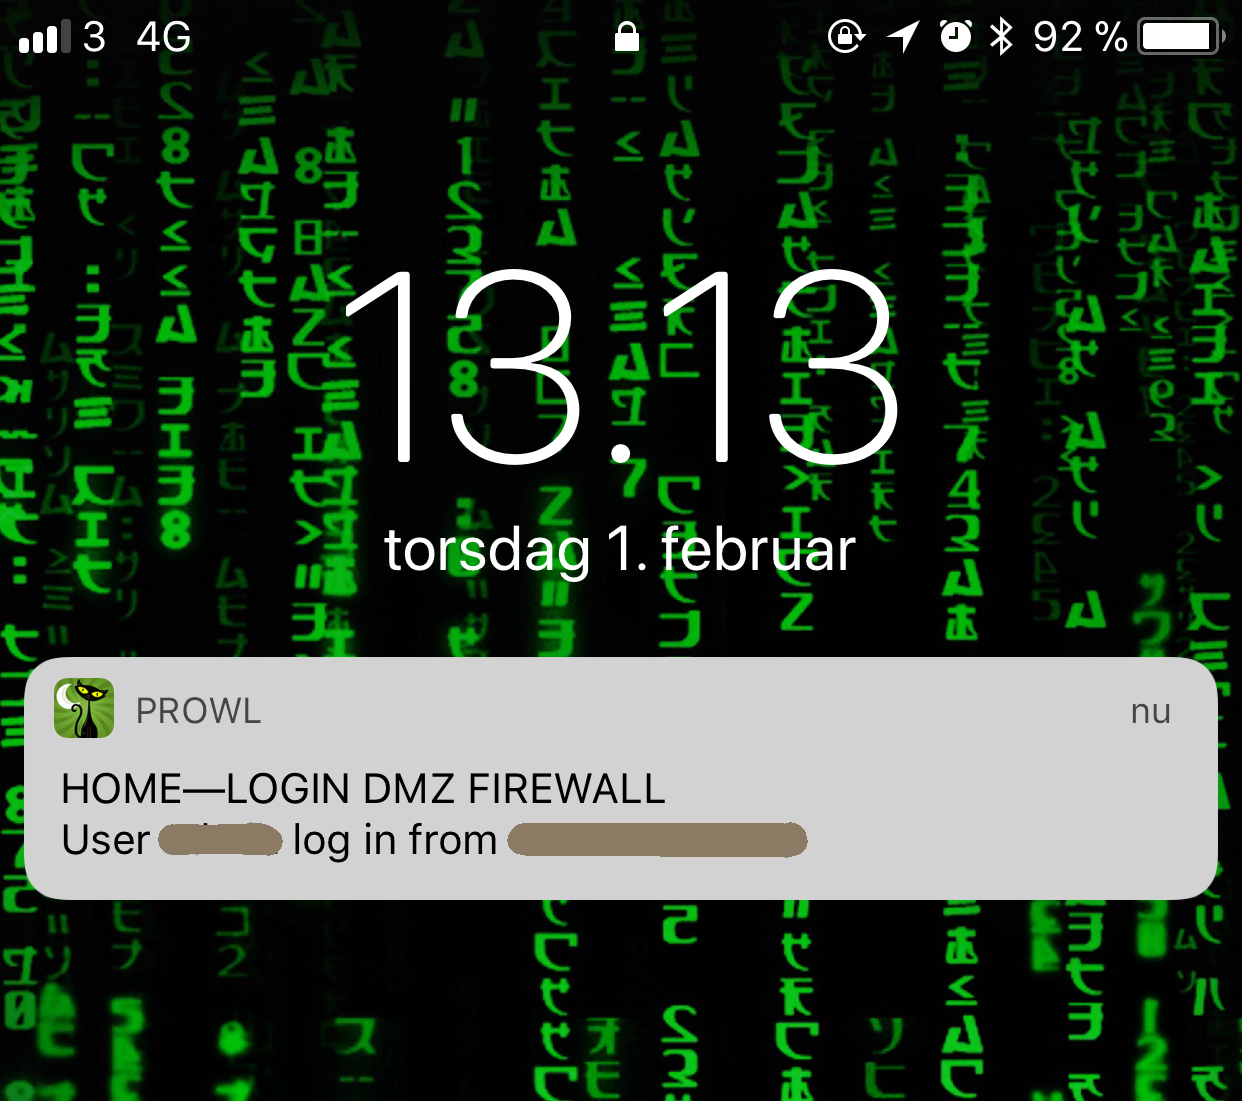 This is a prowl push message showing me that someone is logging in to my firewall via SSH